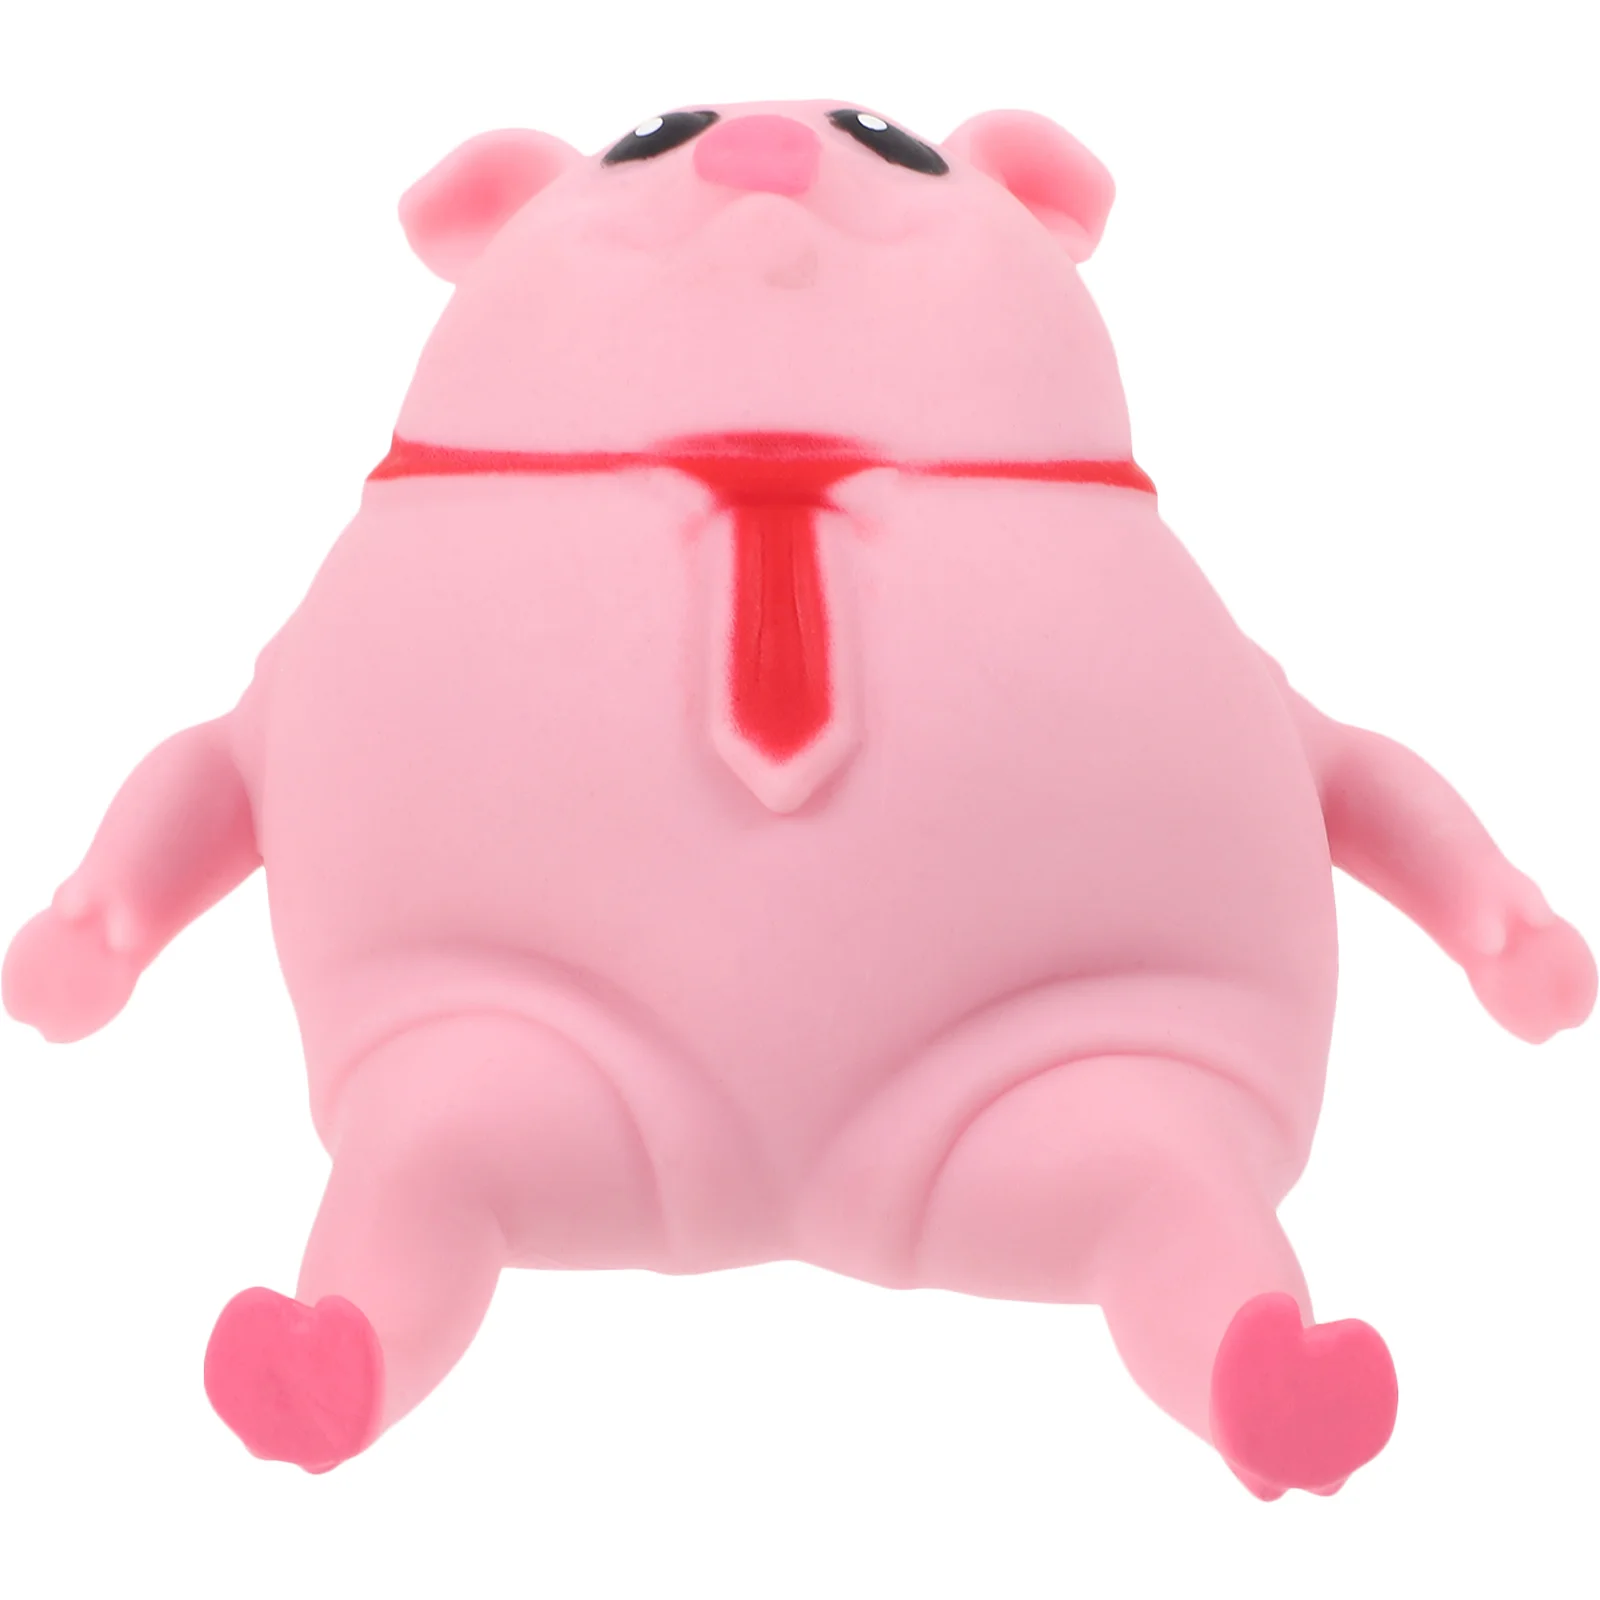 

Toy Toys Stress Kids Squishy Office Desk Decompression Piggy Animal Stretch Squeeze Pink Squeezing Balls Simulation Sensory Ball